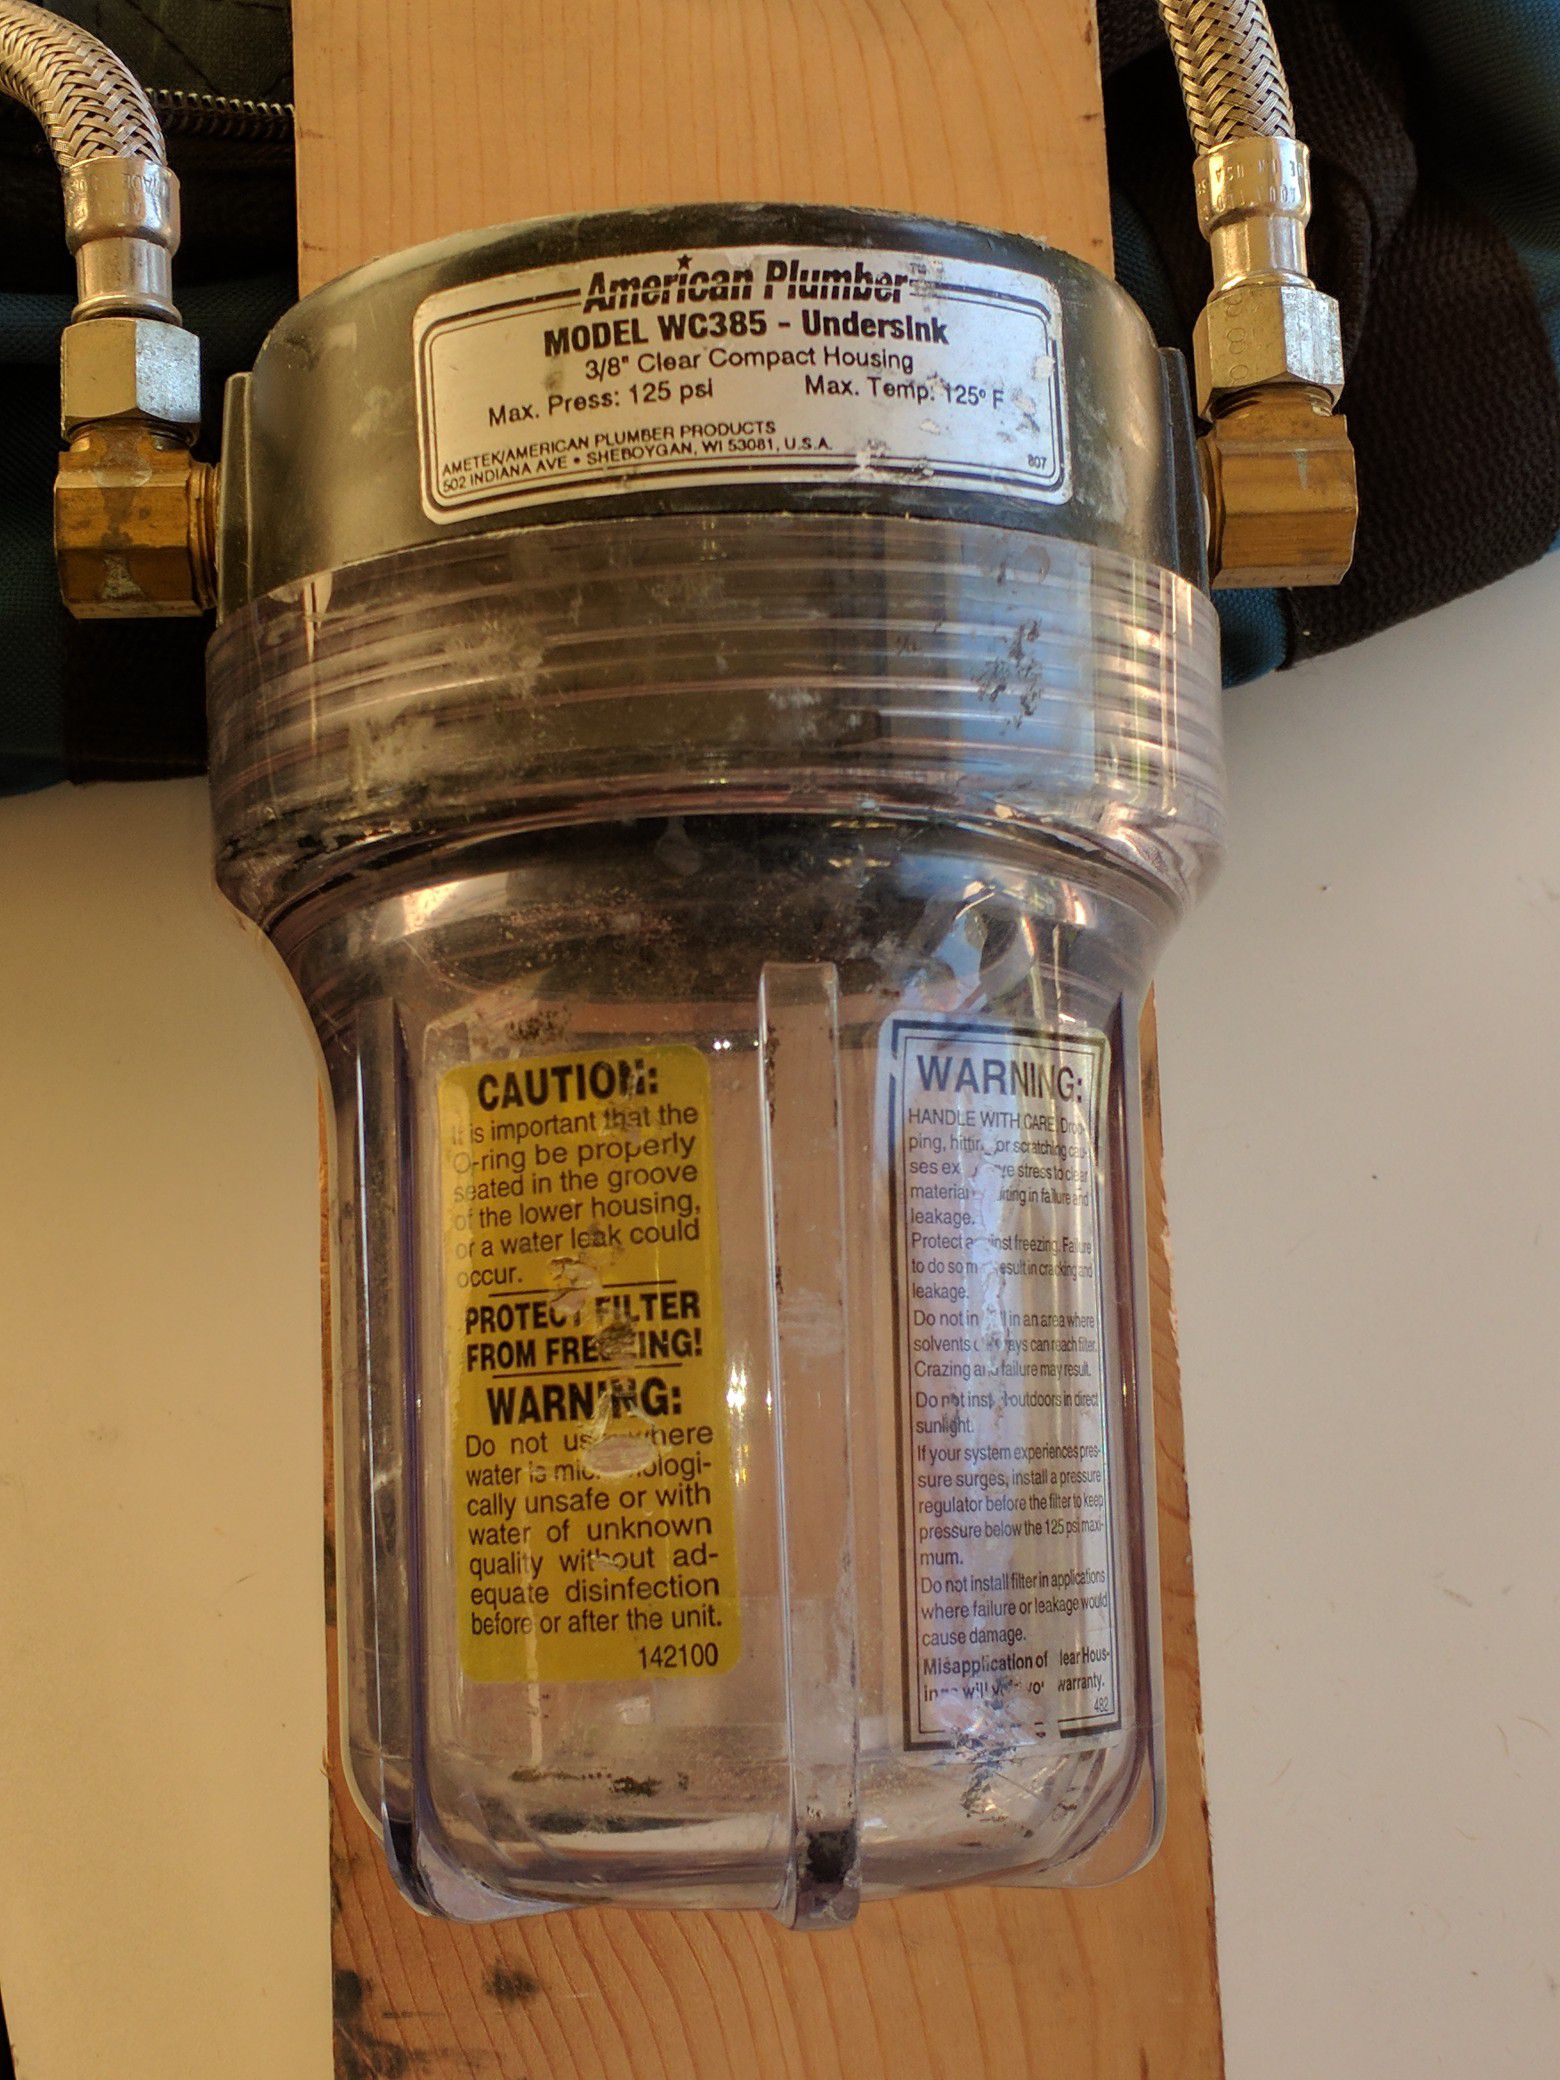 Filter canister from RV